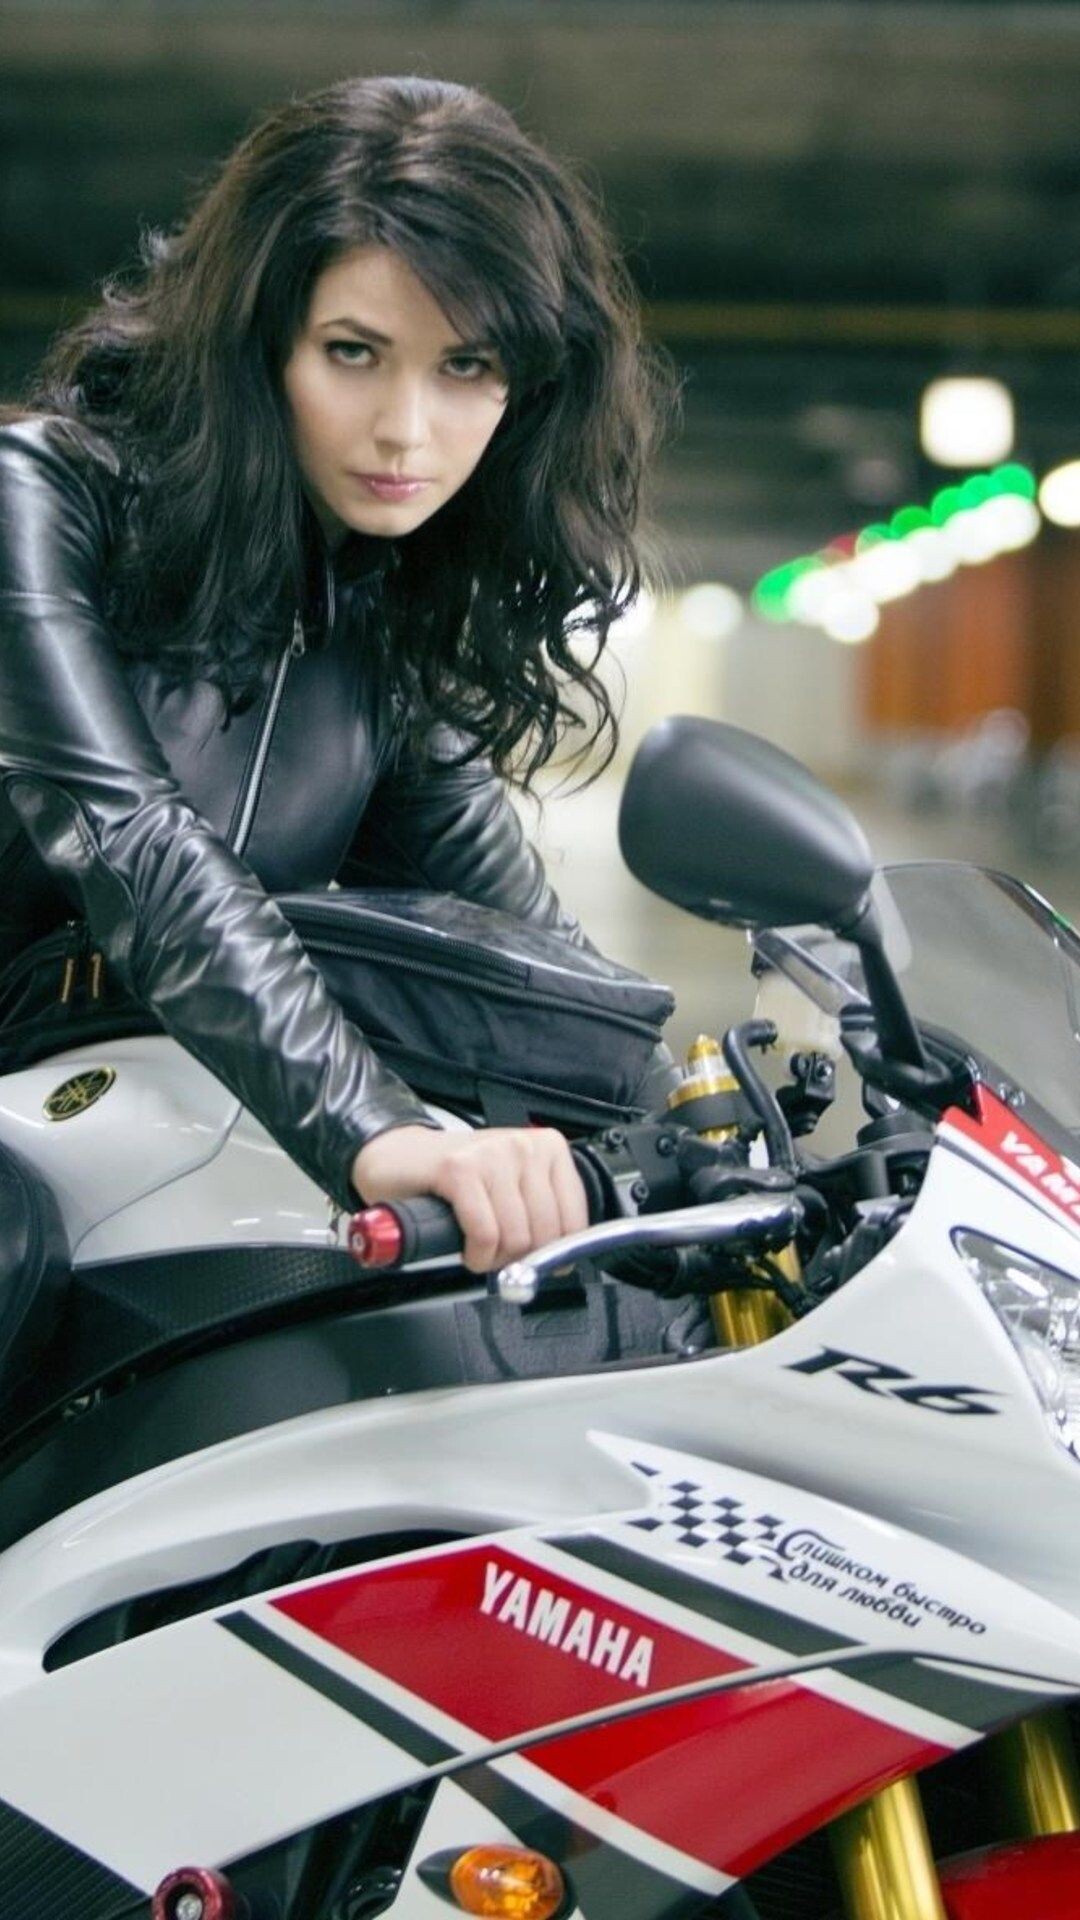 Girls and Motorcycles: Yulia Snigir, A Russian actress and model, The Yamaha YZF-R6, A sport bike. 1080x1920 Full HD Background.